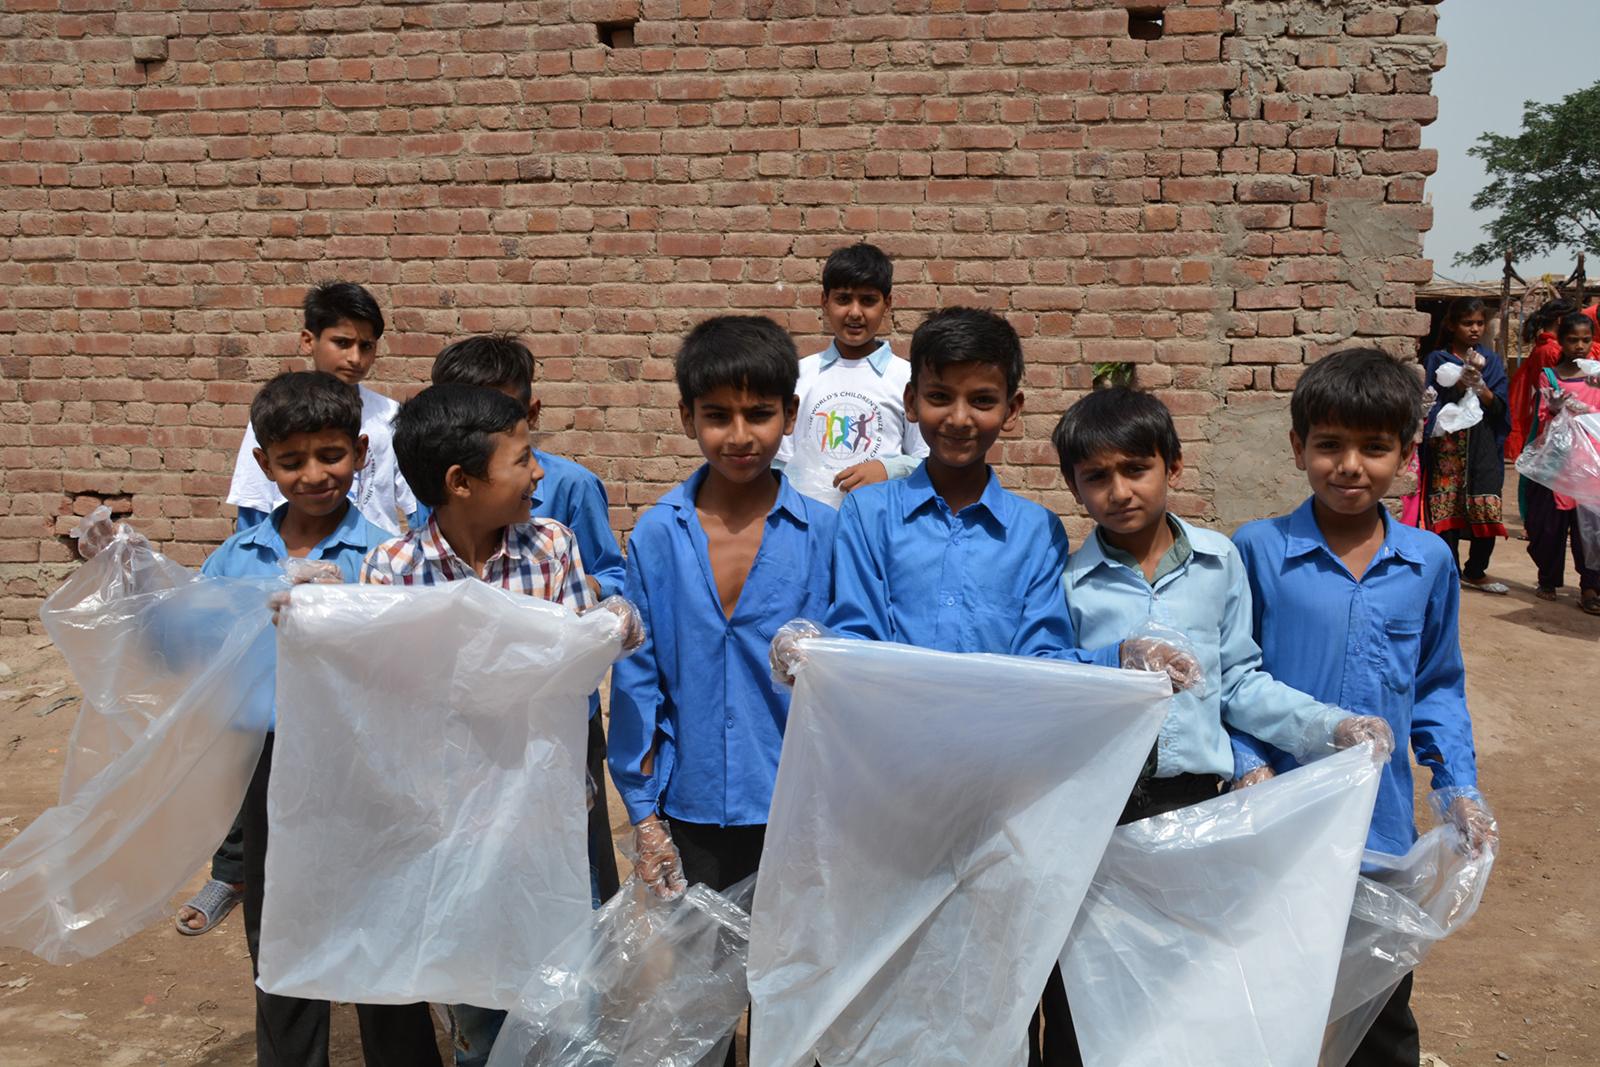 Nine boys in white and blue shirts standing in front of a brick wall, holding plastic bags 